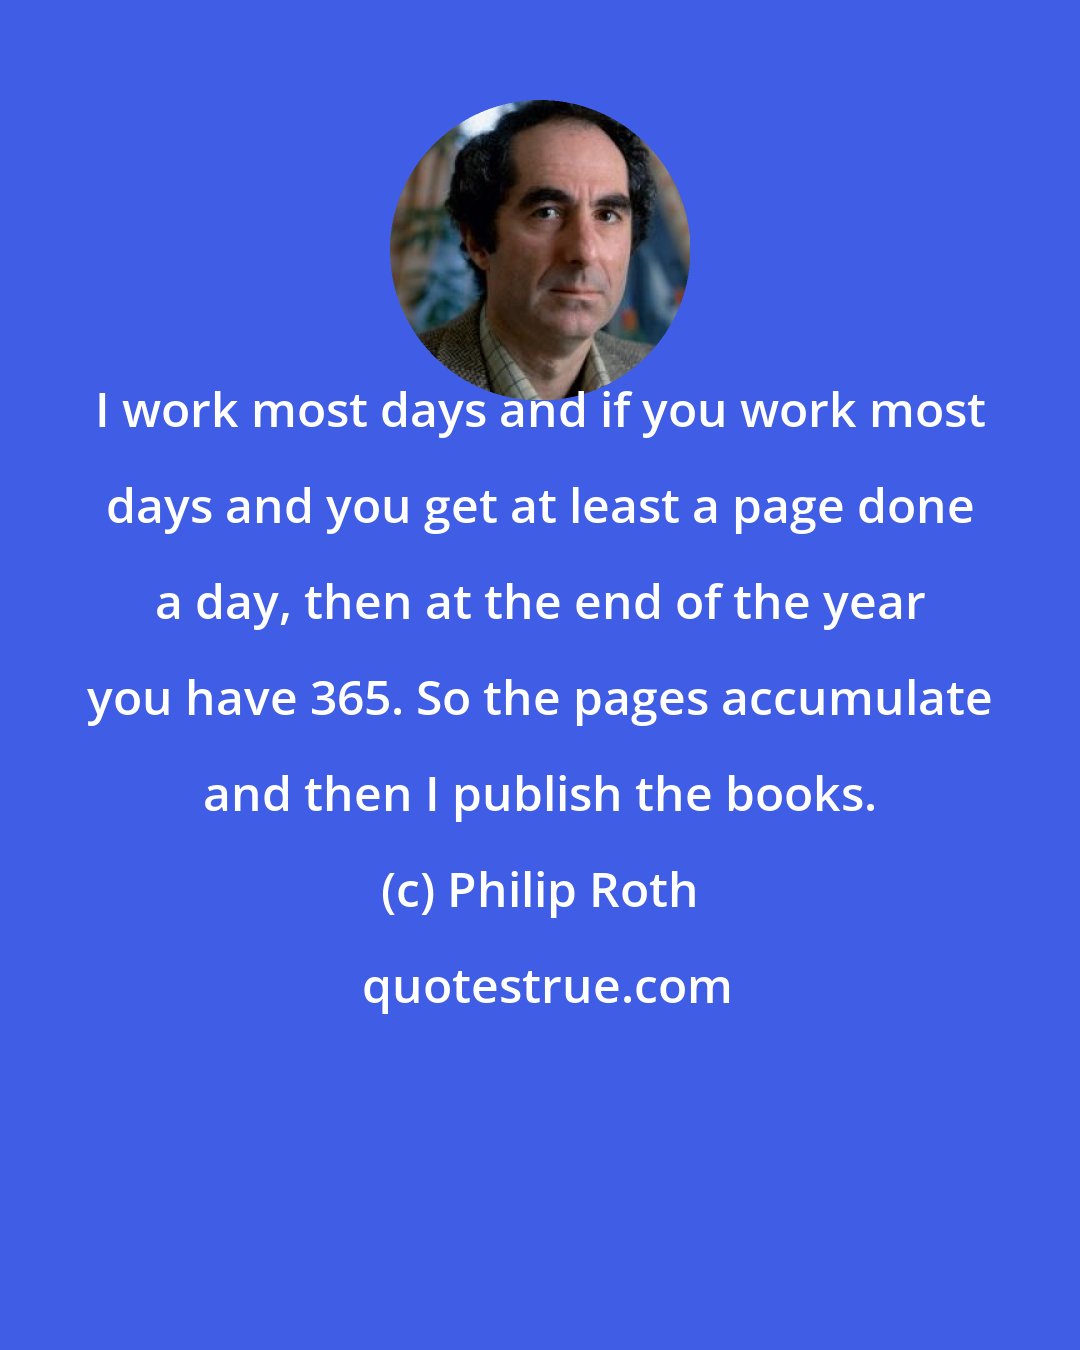 Philip Roth: I work most days and if you work most days and you get at least a page done a day, then at the end of the year you have 365. So the pages accumulate and then I publish the books.